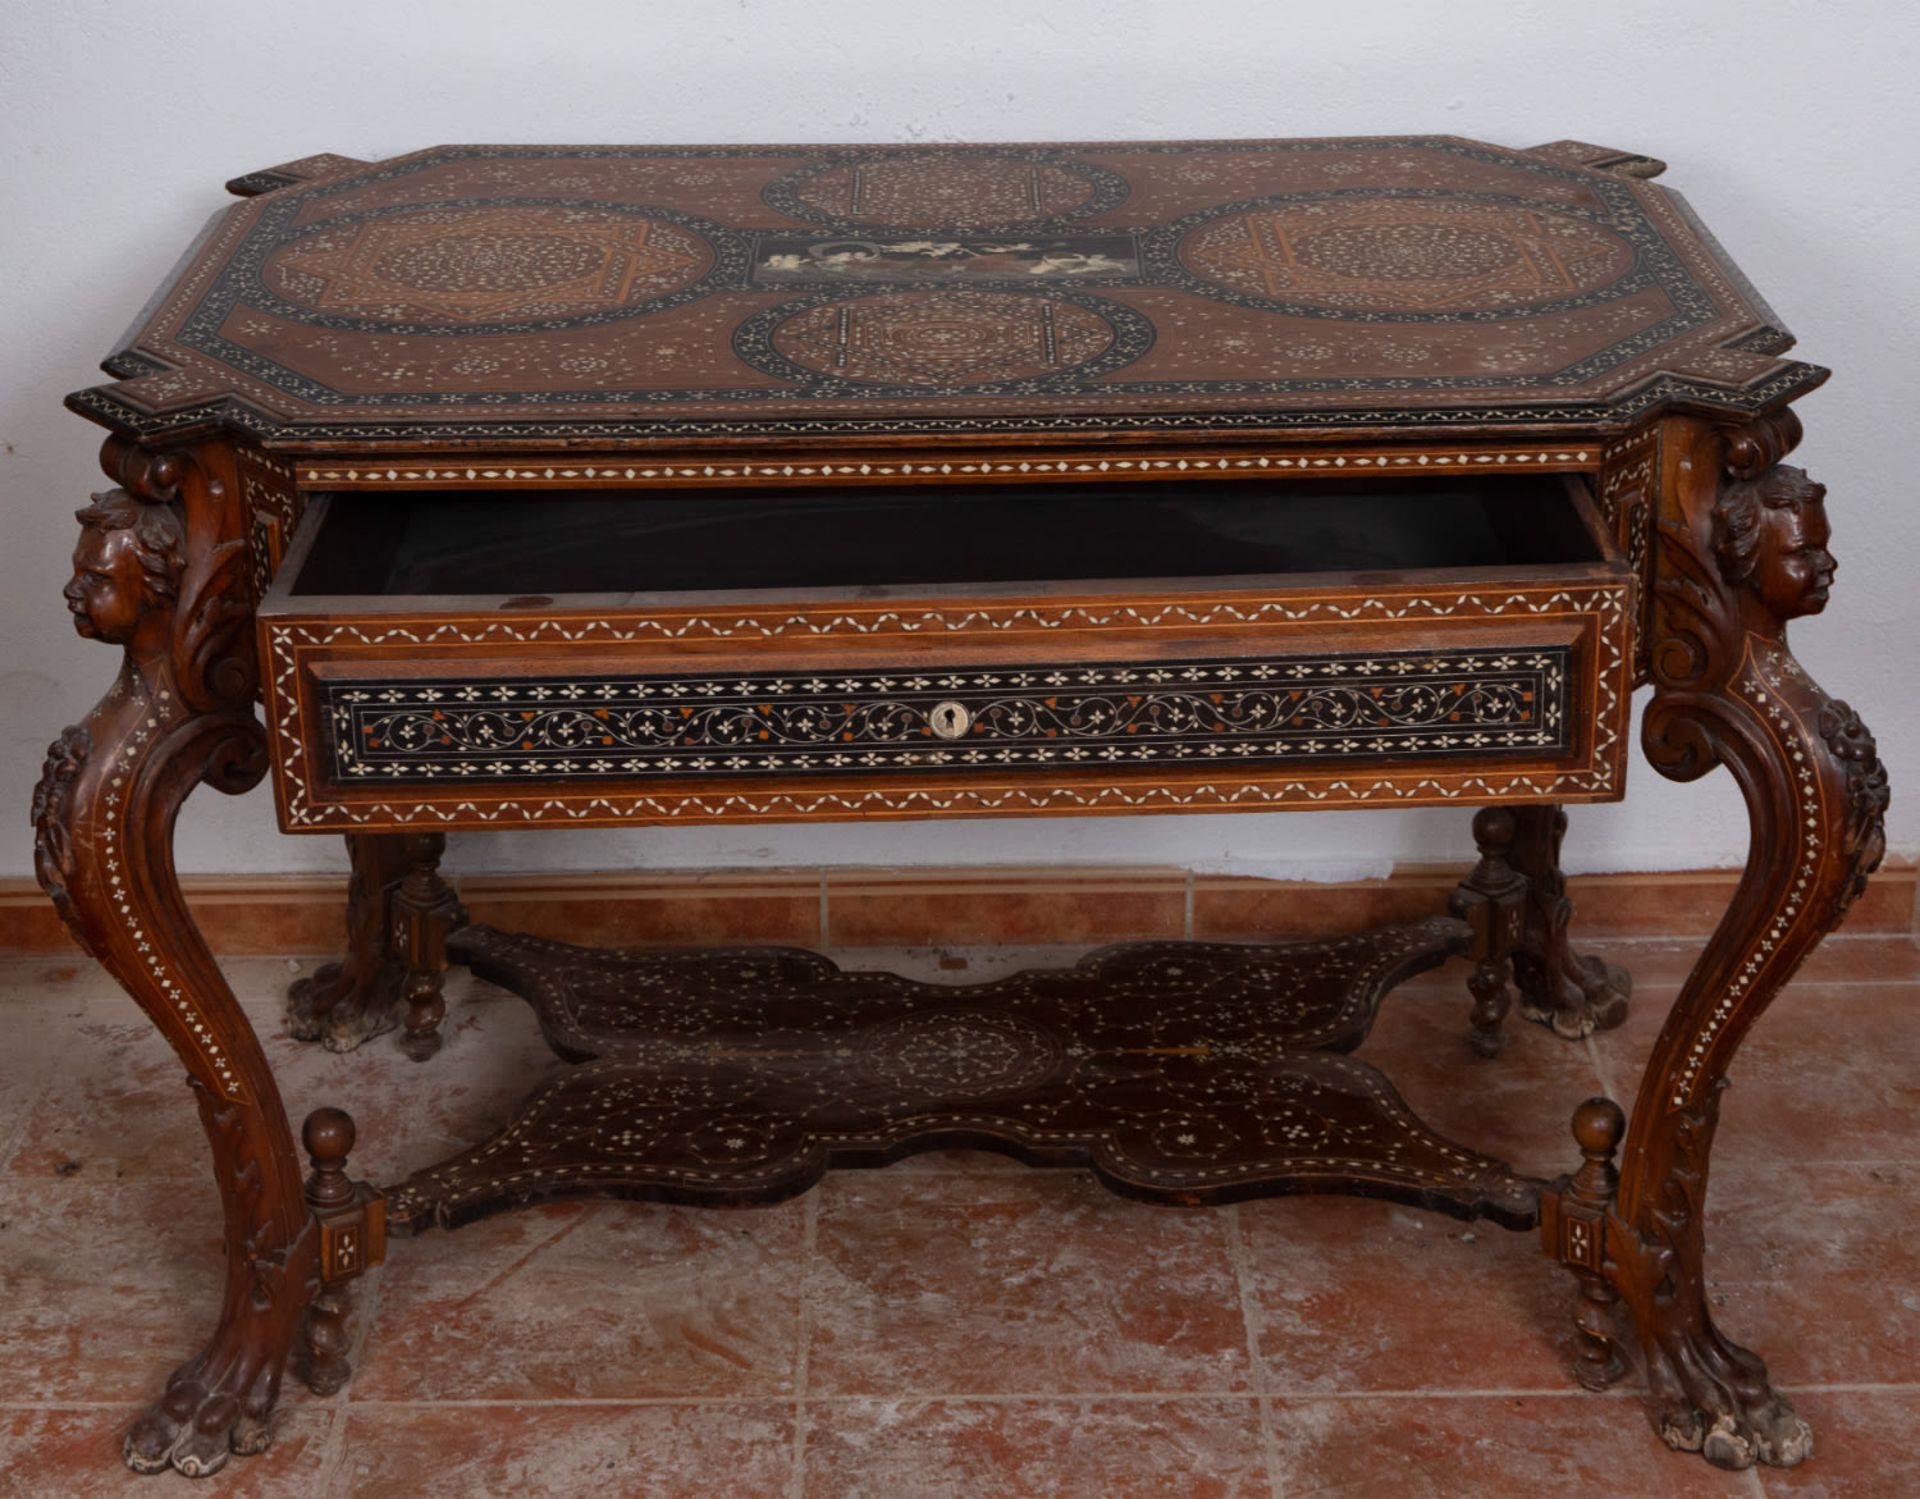 Beautiful table with drawer, made of copper, ebony and mother-of-pearl with bone inlays, 19th centur - Bild 4 aus 5